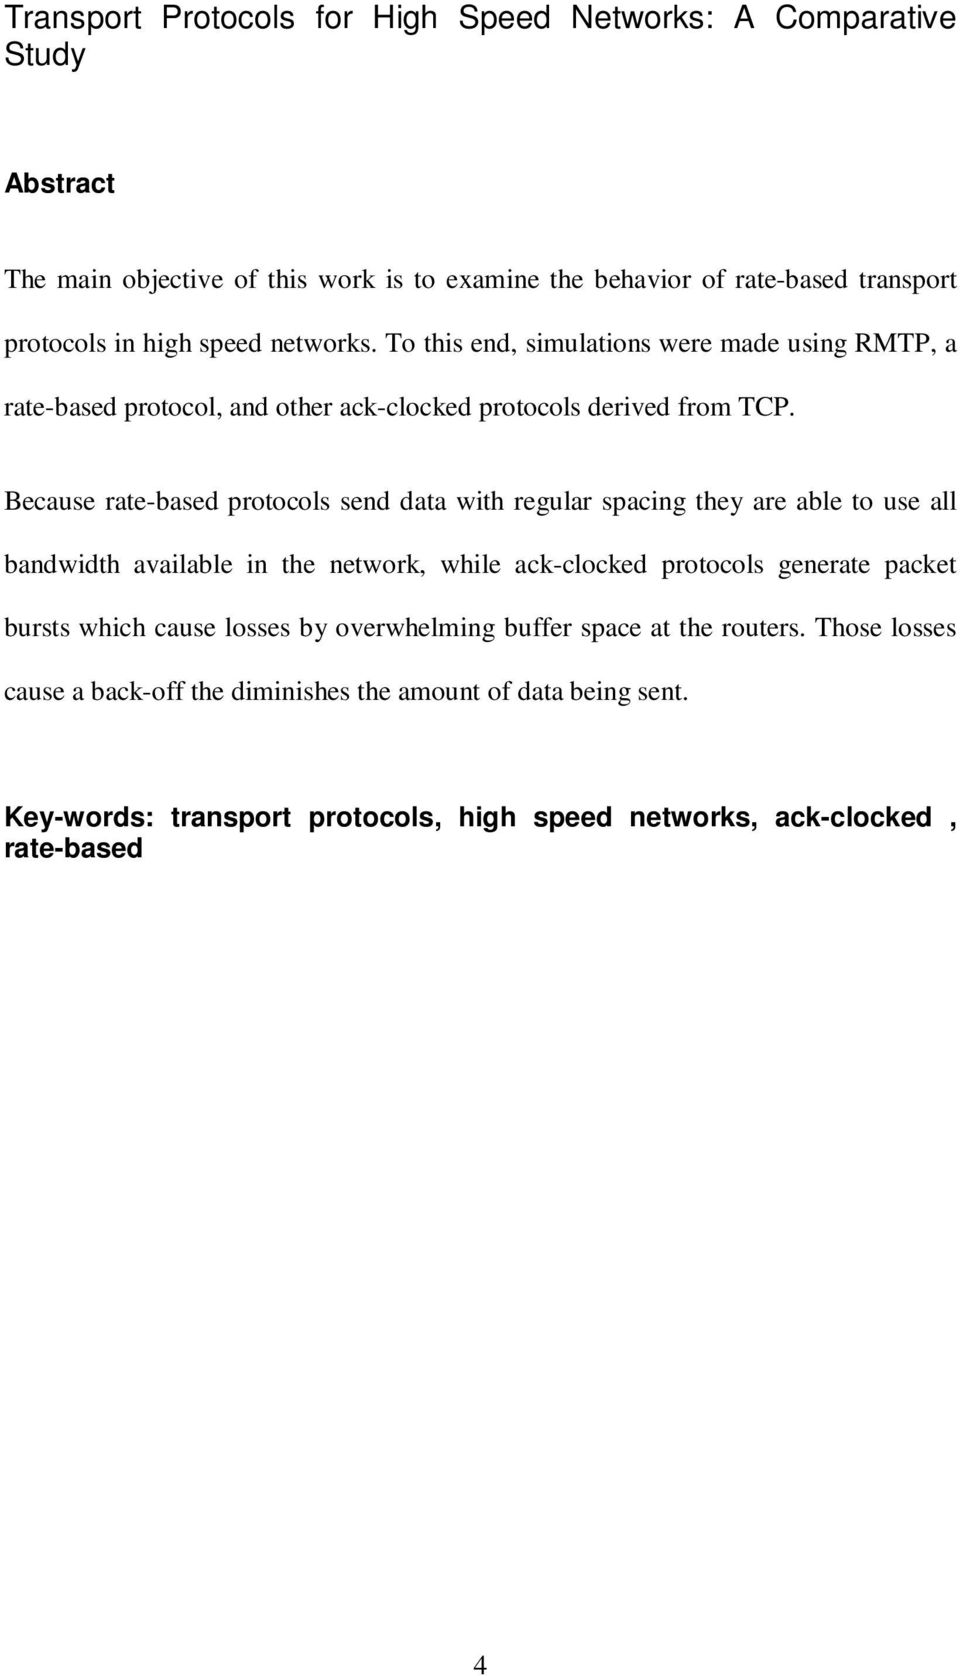 Because rate-based protocols send data with regular spacing they are able to use all bandwidth available in the network, while ack-clocked protocols generate packet bursts